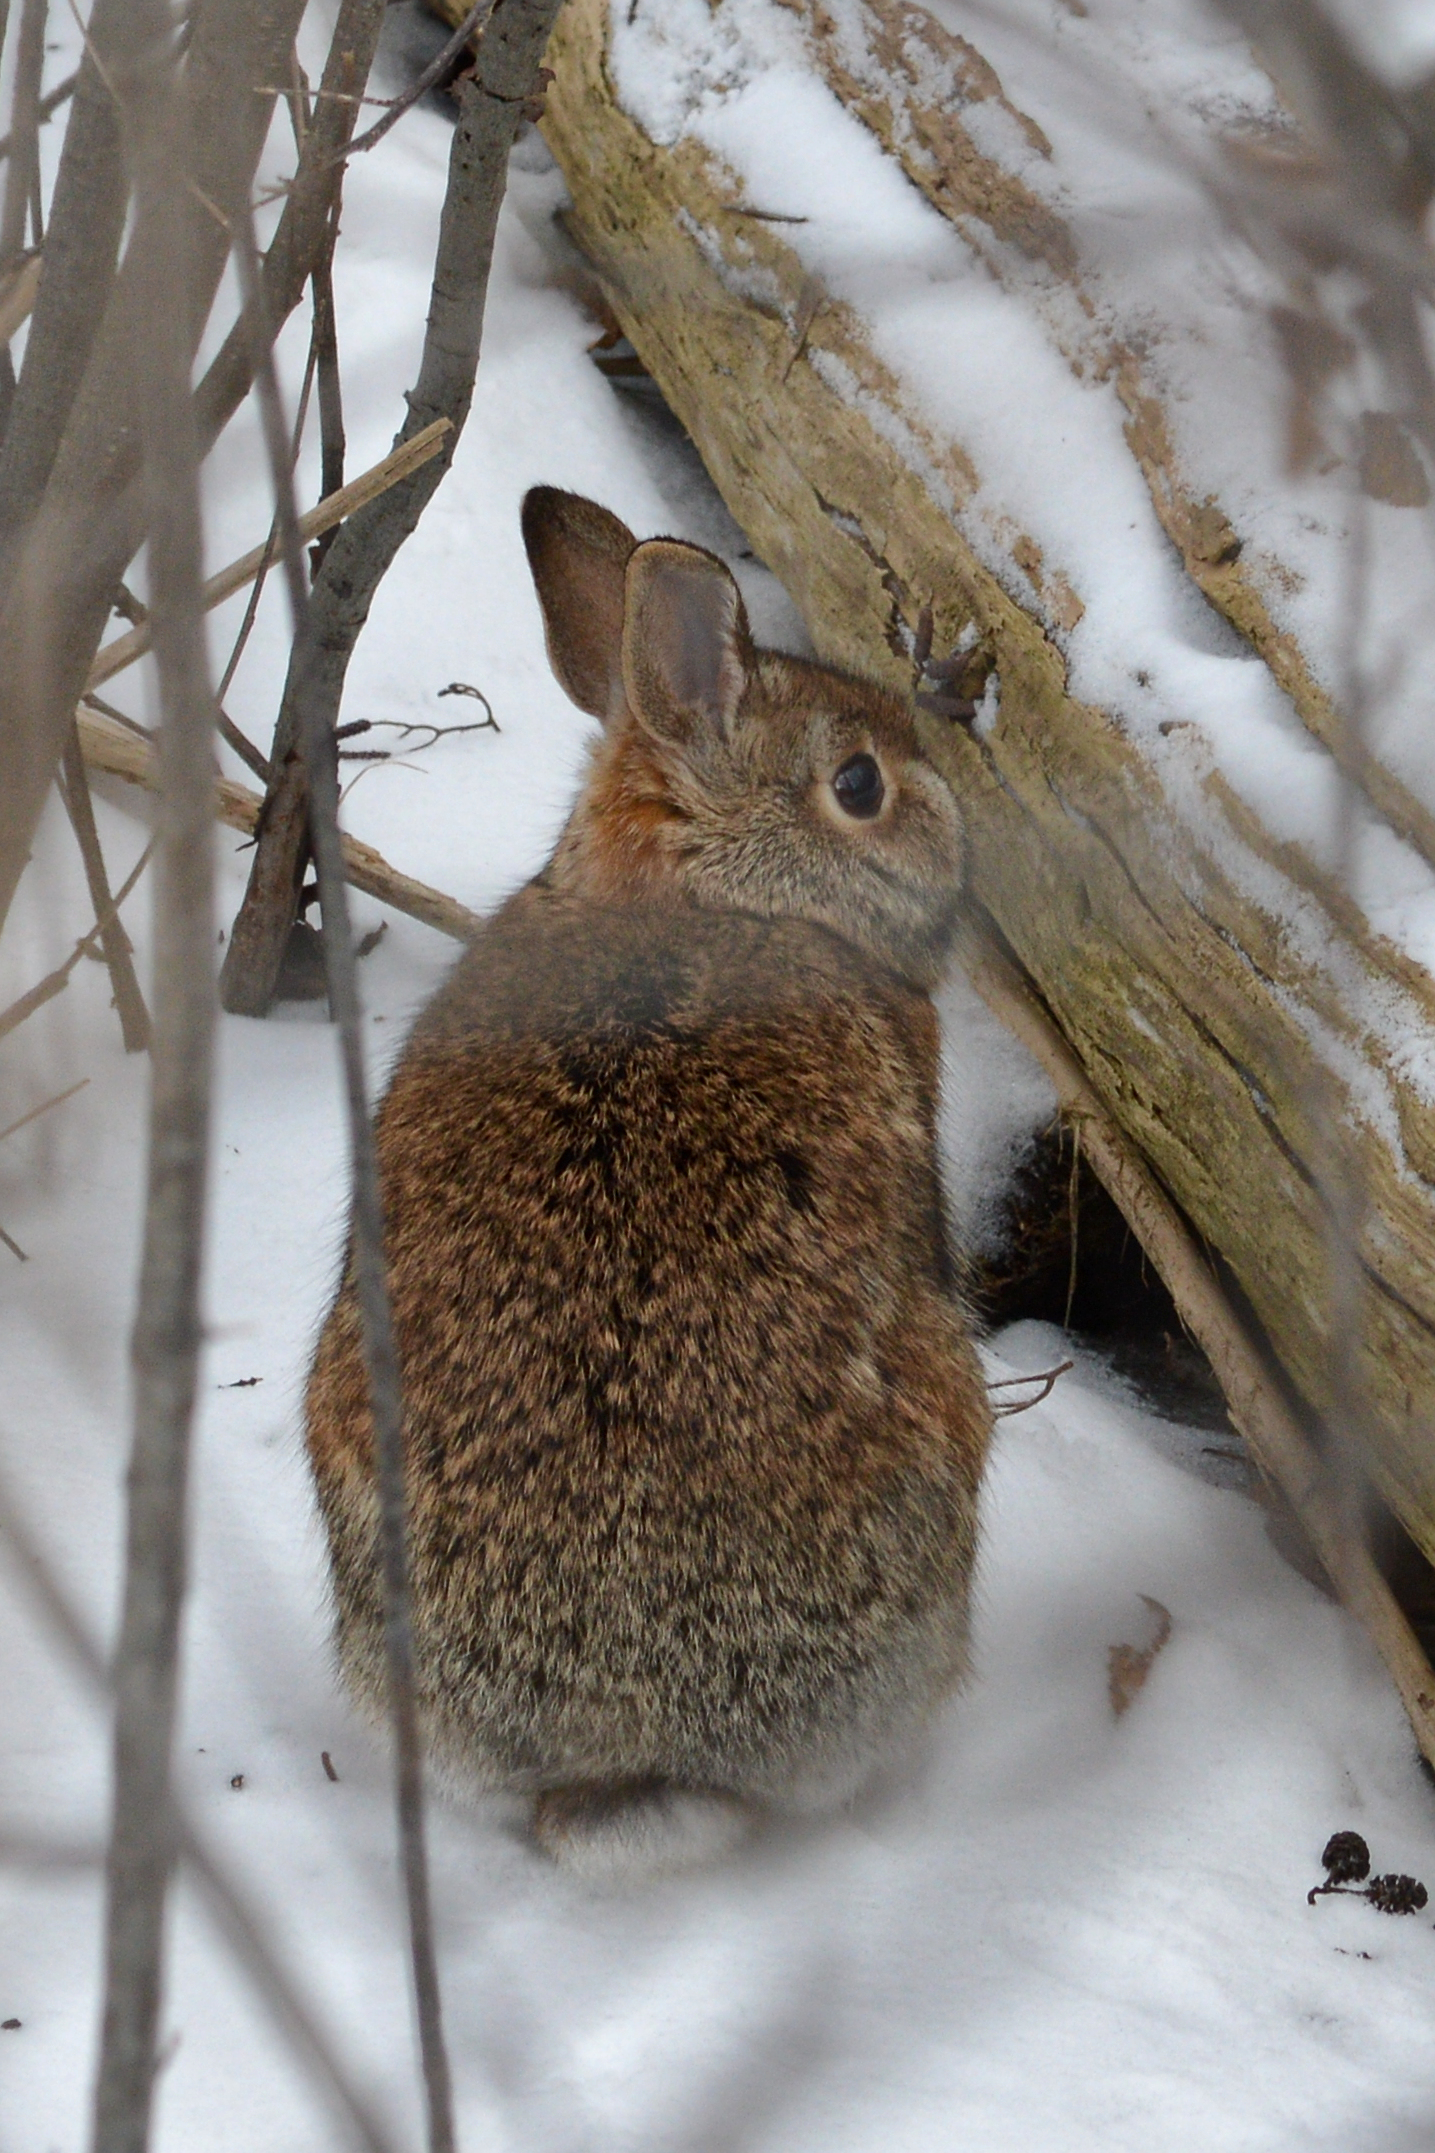 A grey brown critter with long ears sits in the snow next to a fallen tree limb. Eastern Cottontail Rabbit.